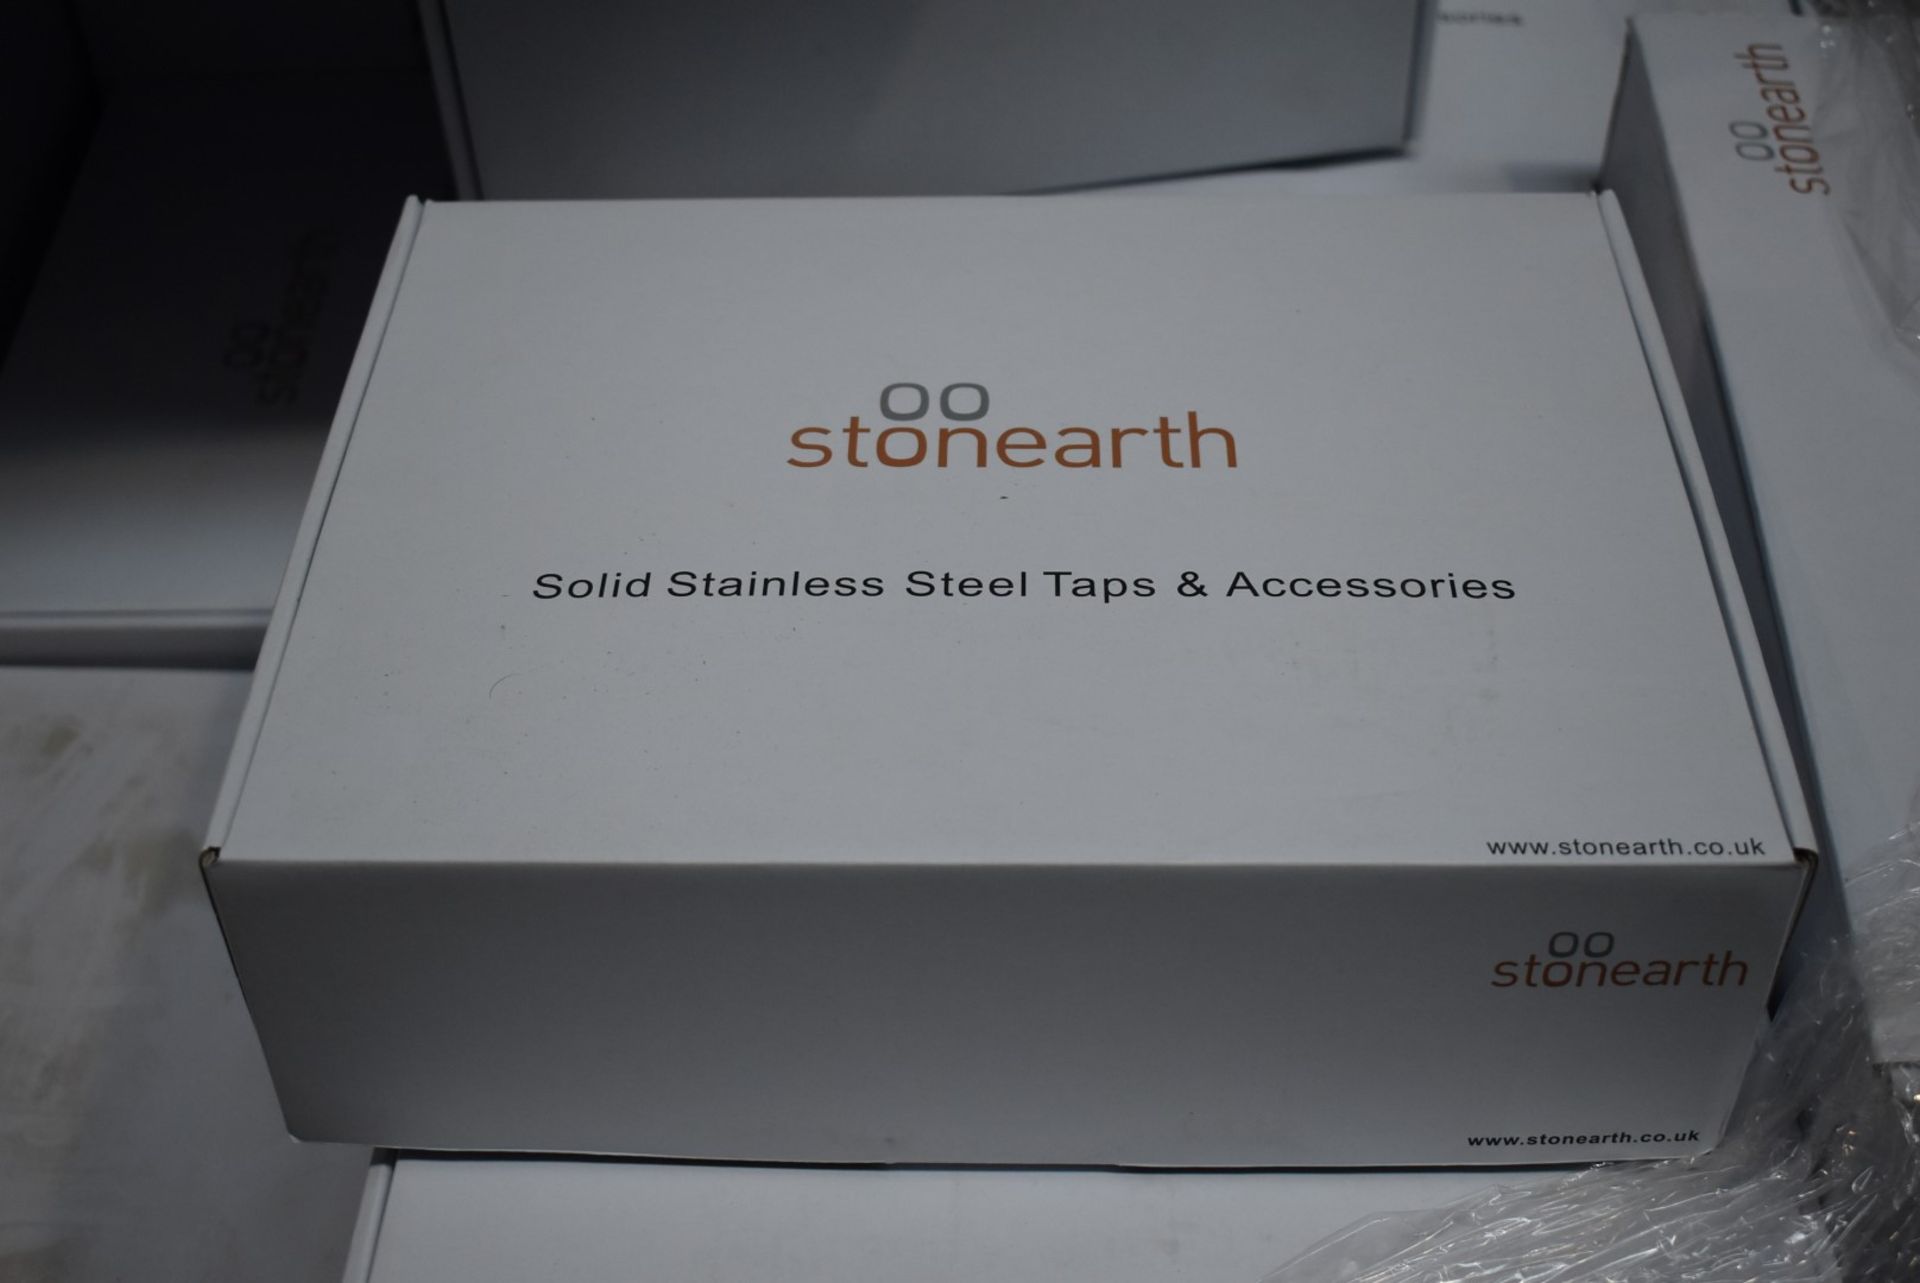 1 x Stonearth 'Metro' Stainless Steel Basin Mixer Tap - Brand New & Boxed - CL713 - RRP £245 - - Image 2 of 8